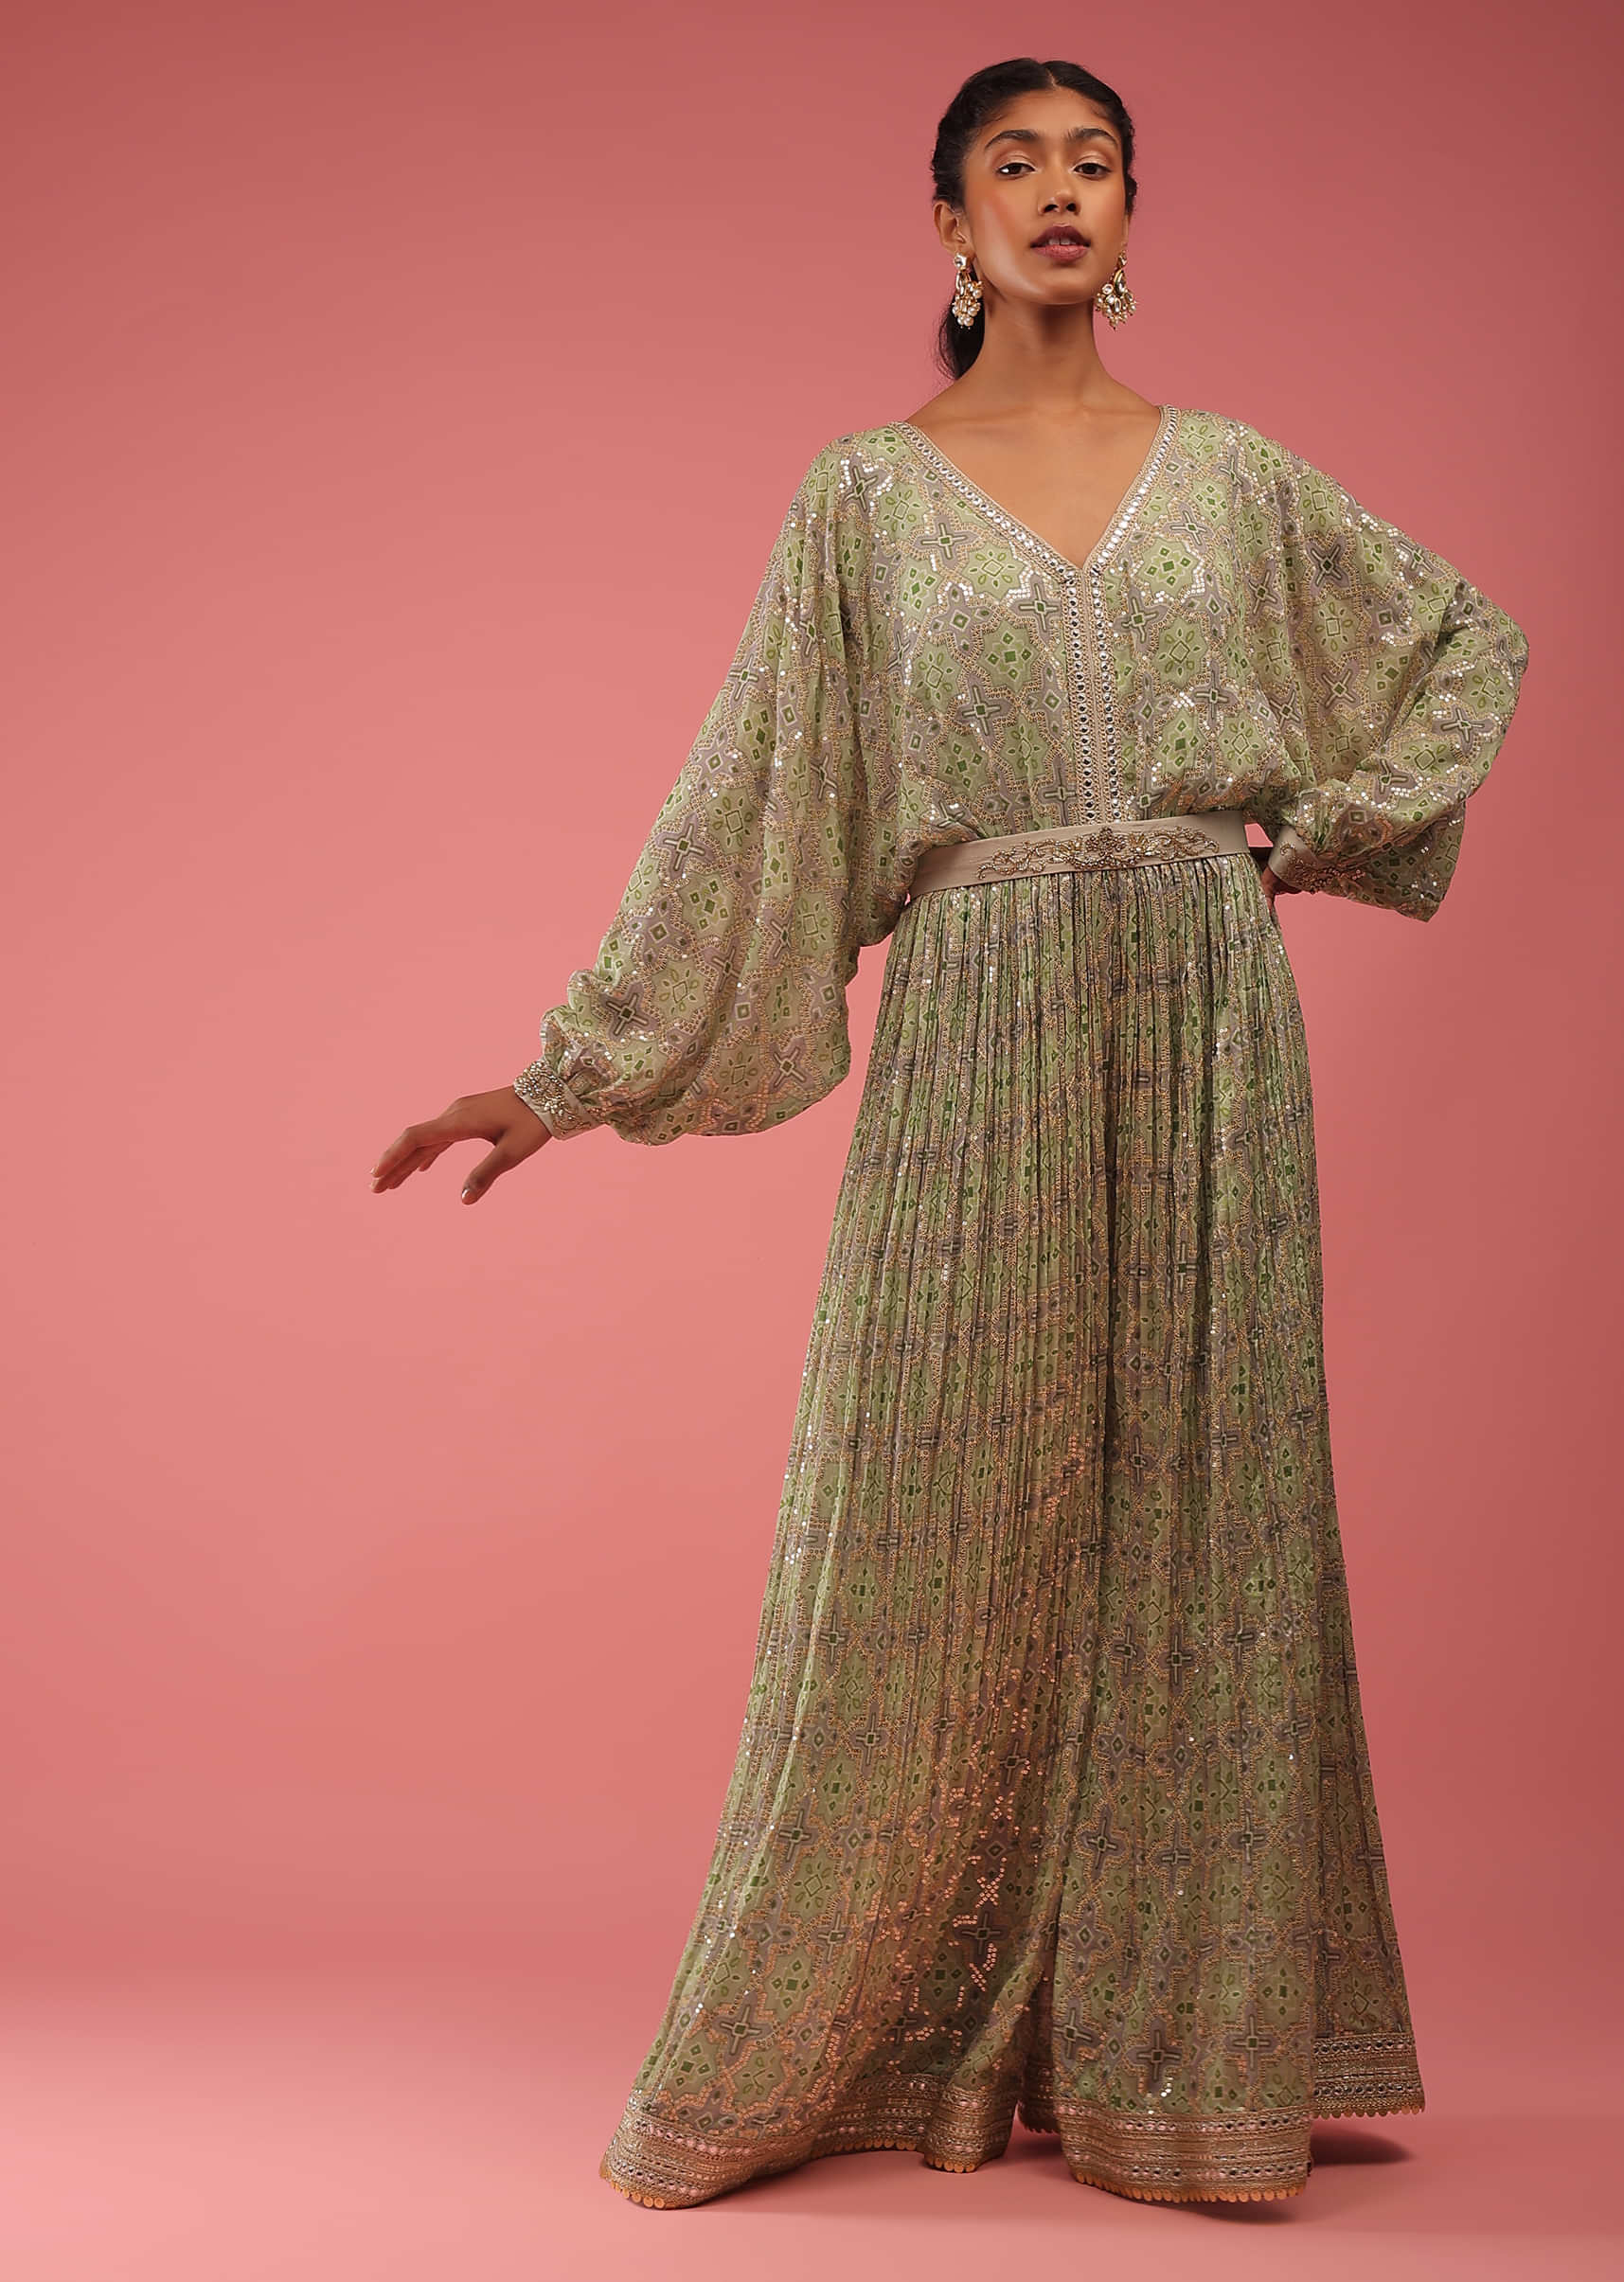 Smoke Green Jumpsuit In Seamless Print With Golden Zari Embroidery, It Is Crafted In Organza With Balloon Sleeves